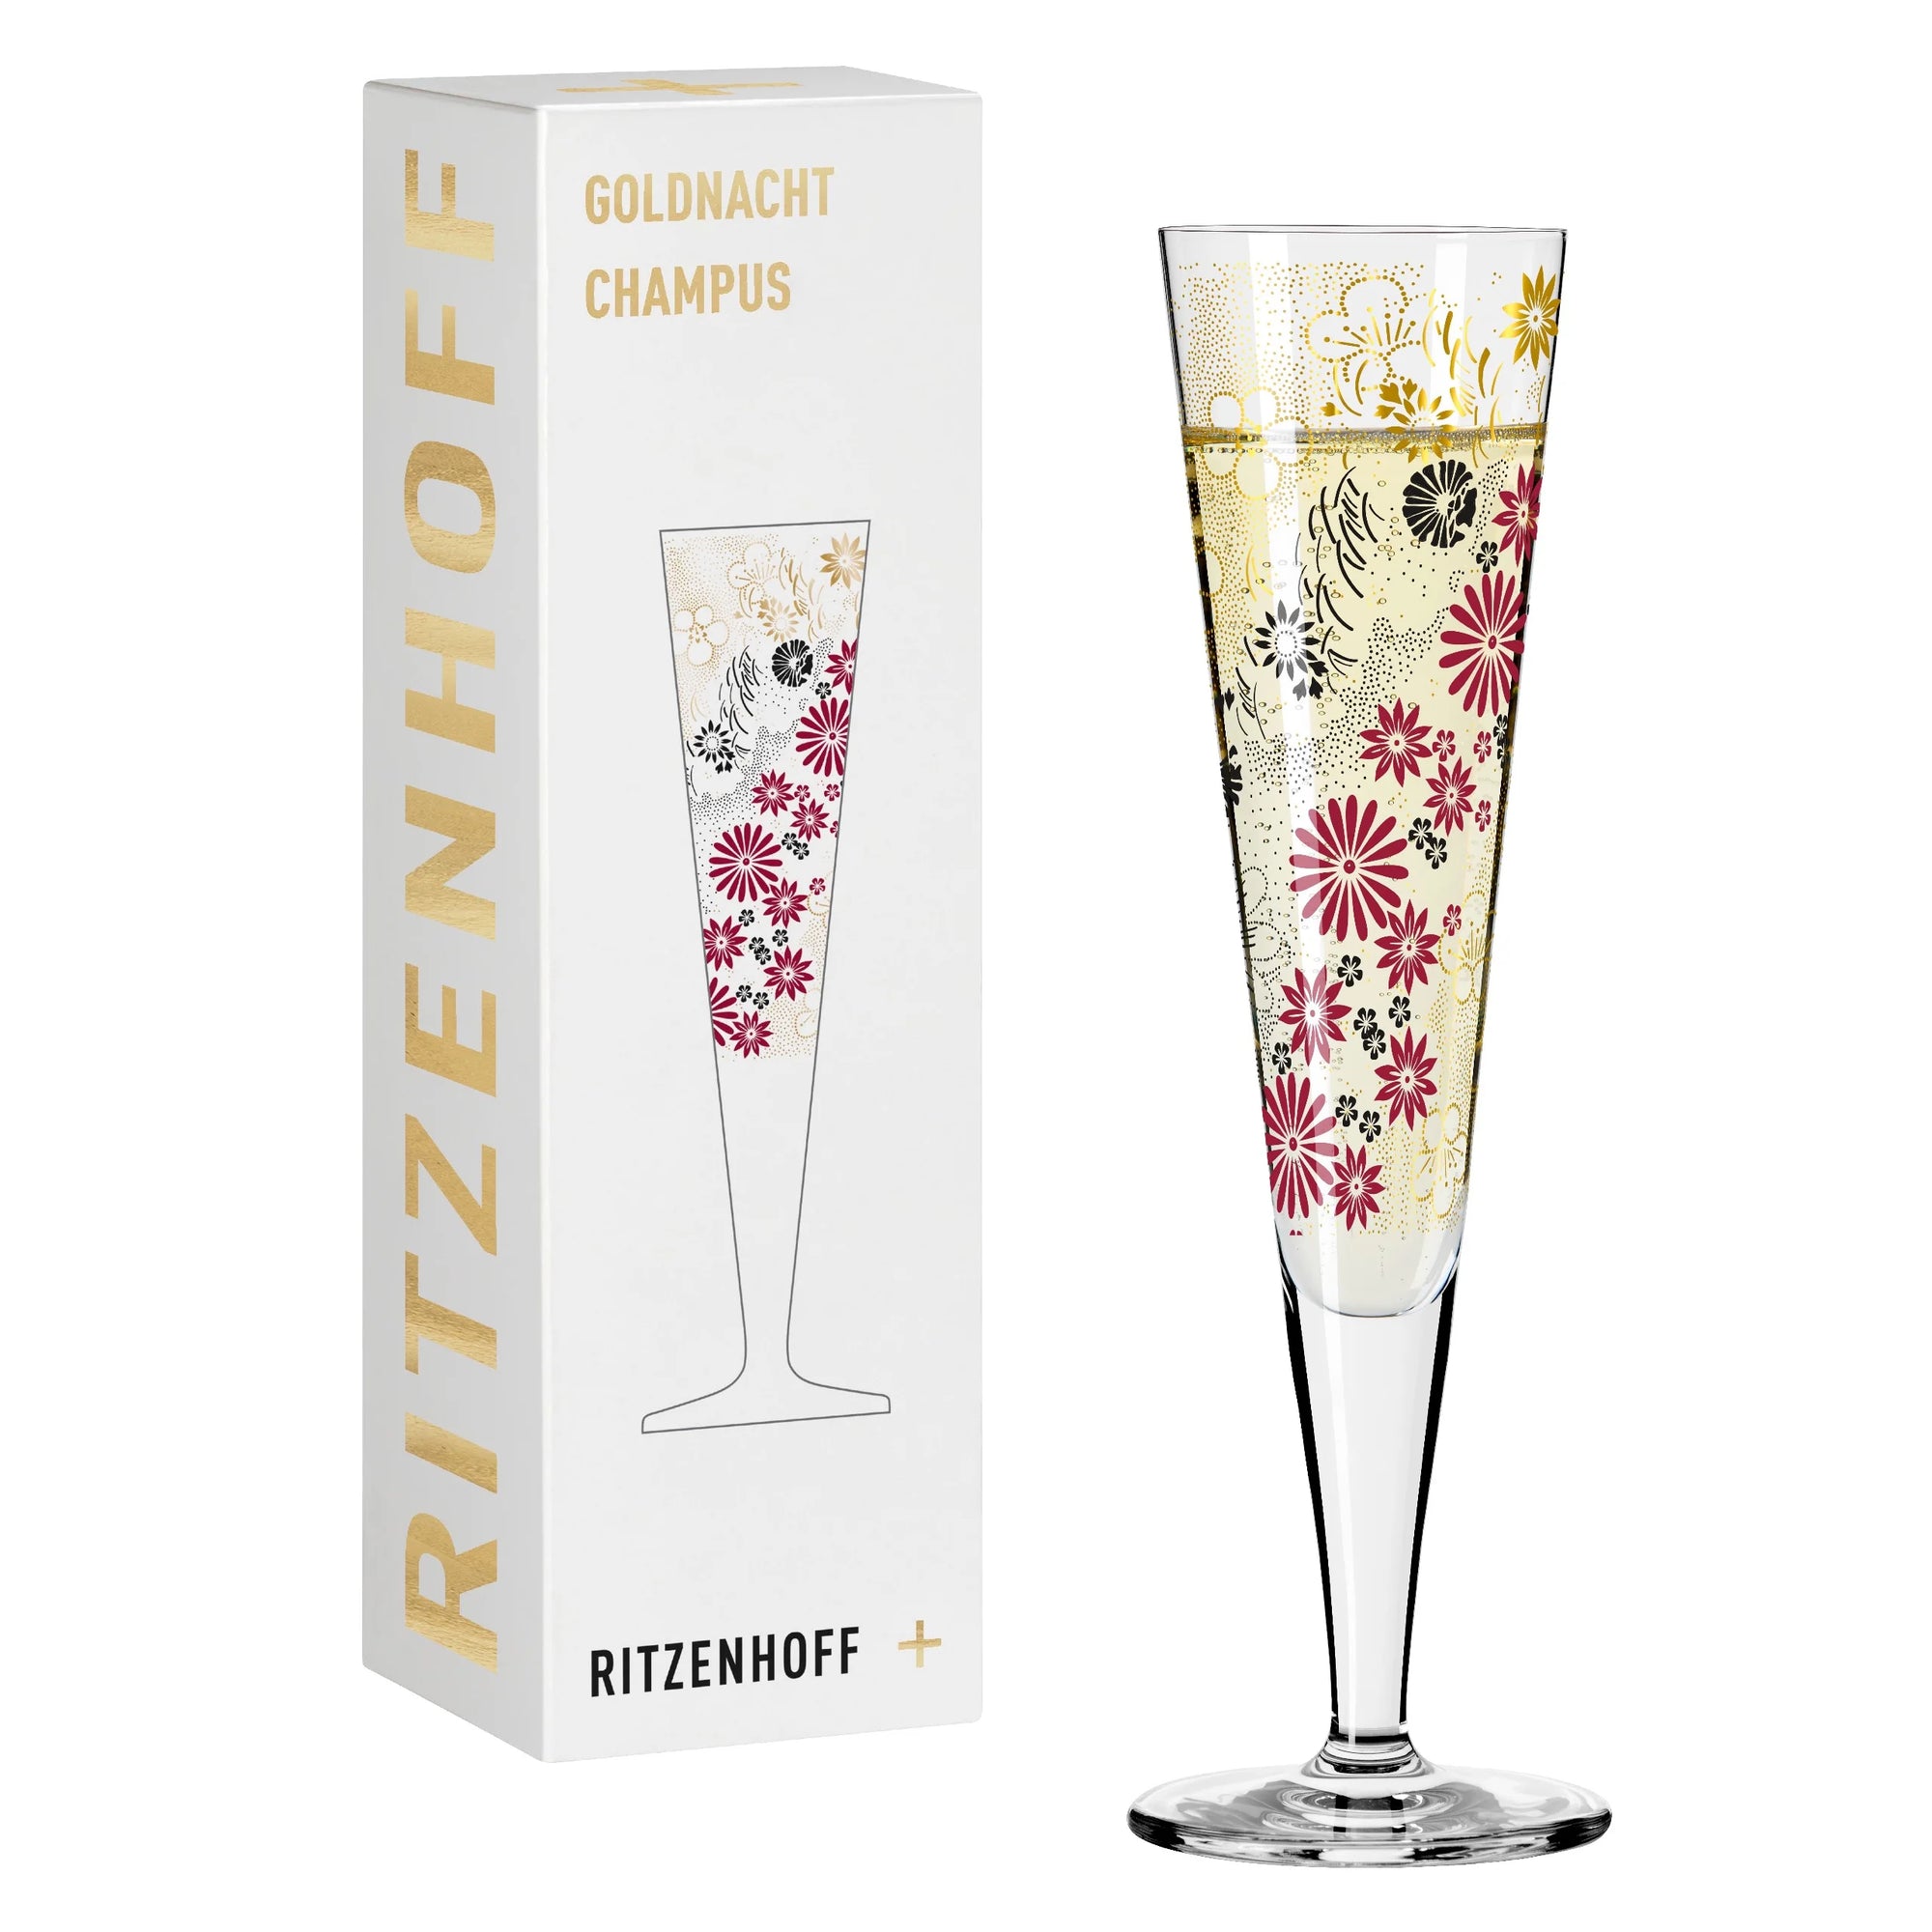 The Ritzenhoff Goldnacht Champagne Glass, 1071024, by Kathrin Stockebrand, presented in an exclusive gift box.